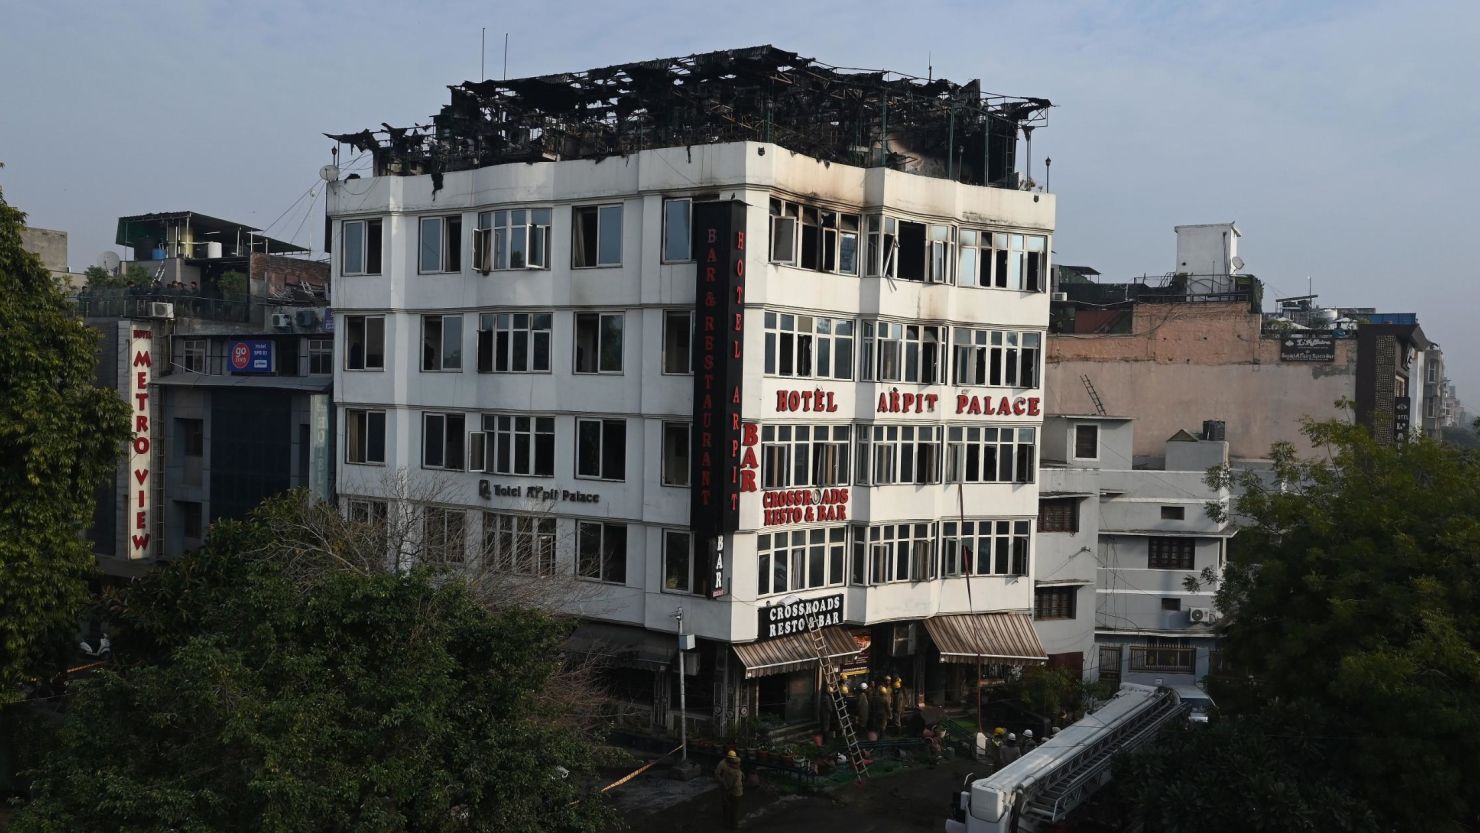 The Hotel Arpit Palace after a fire broke out on its premises in New Delhi on February 12, 2019.